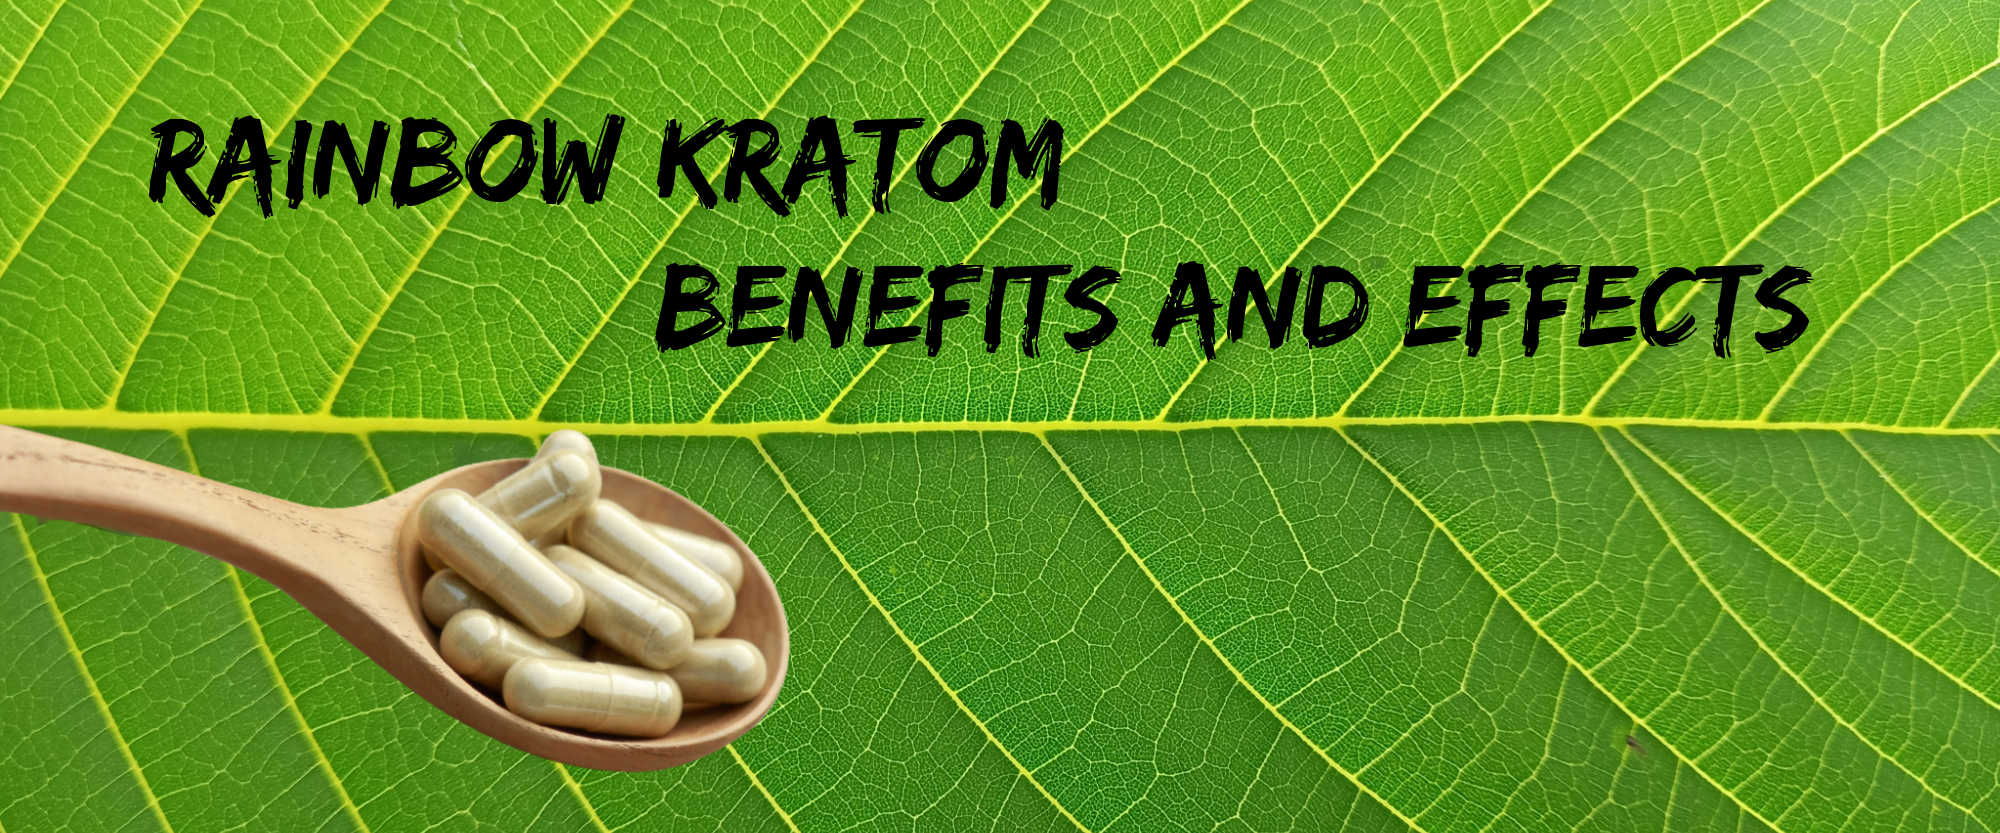 image of rainbow kratom benefits and effects